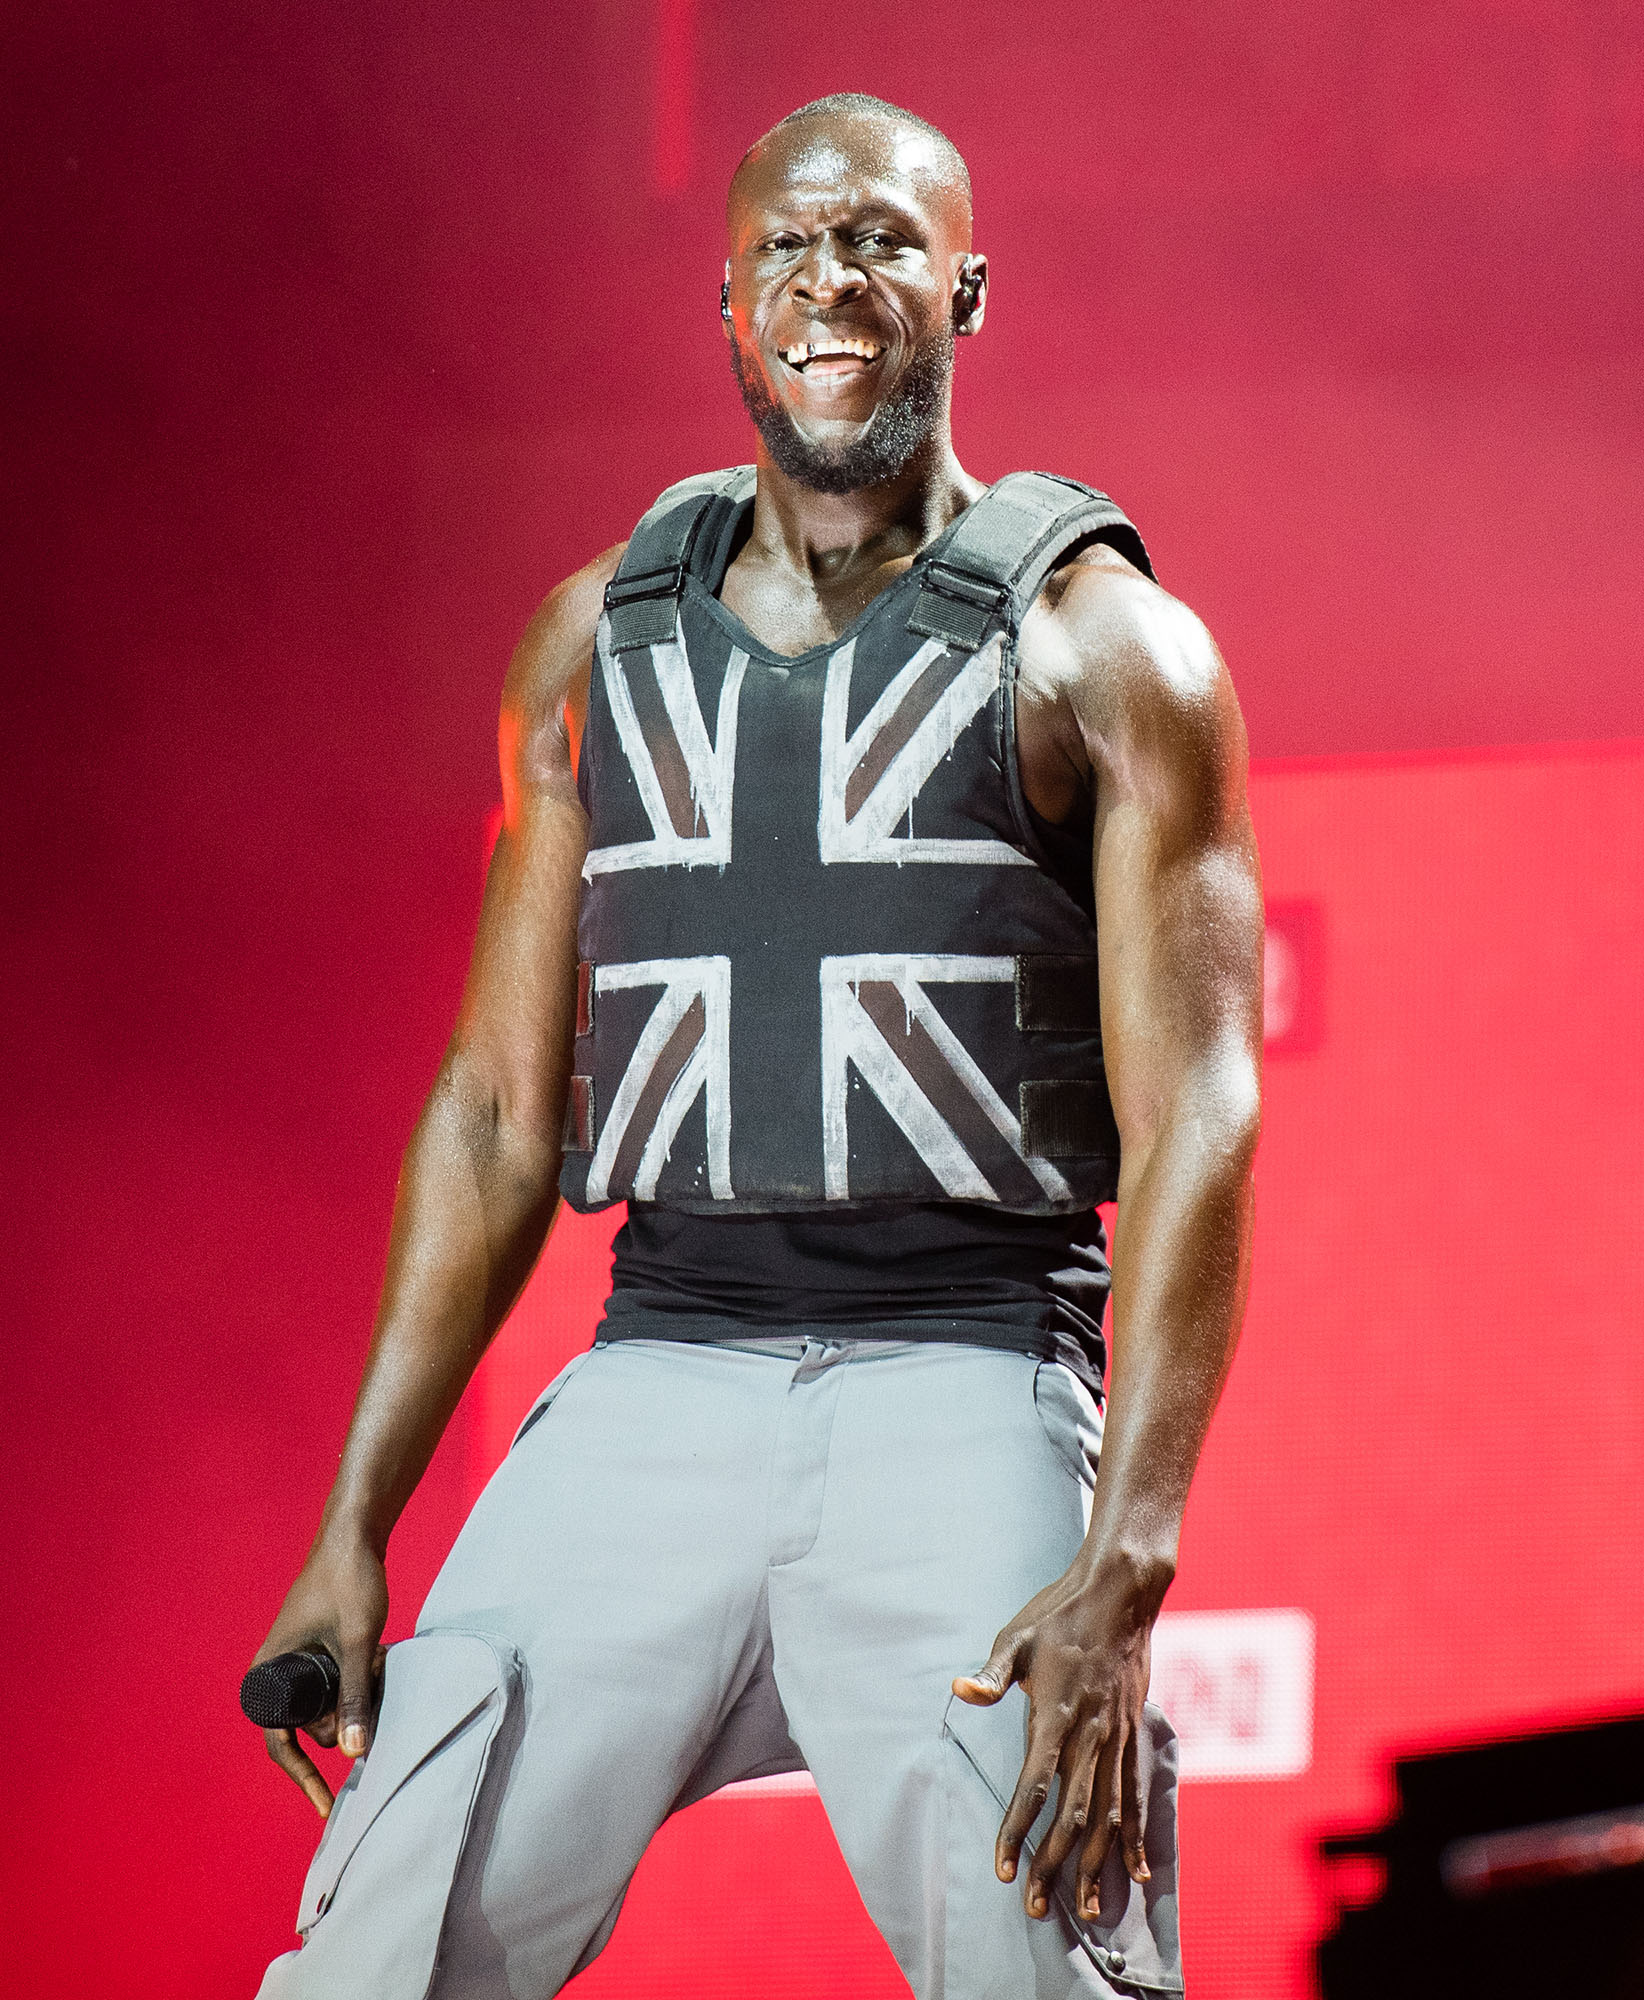 Stormzy performs onstage at Glastonbury festival. He is holding a microphone and wears a stab proof vest with the union jack painted on the front.